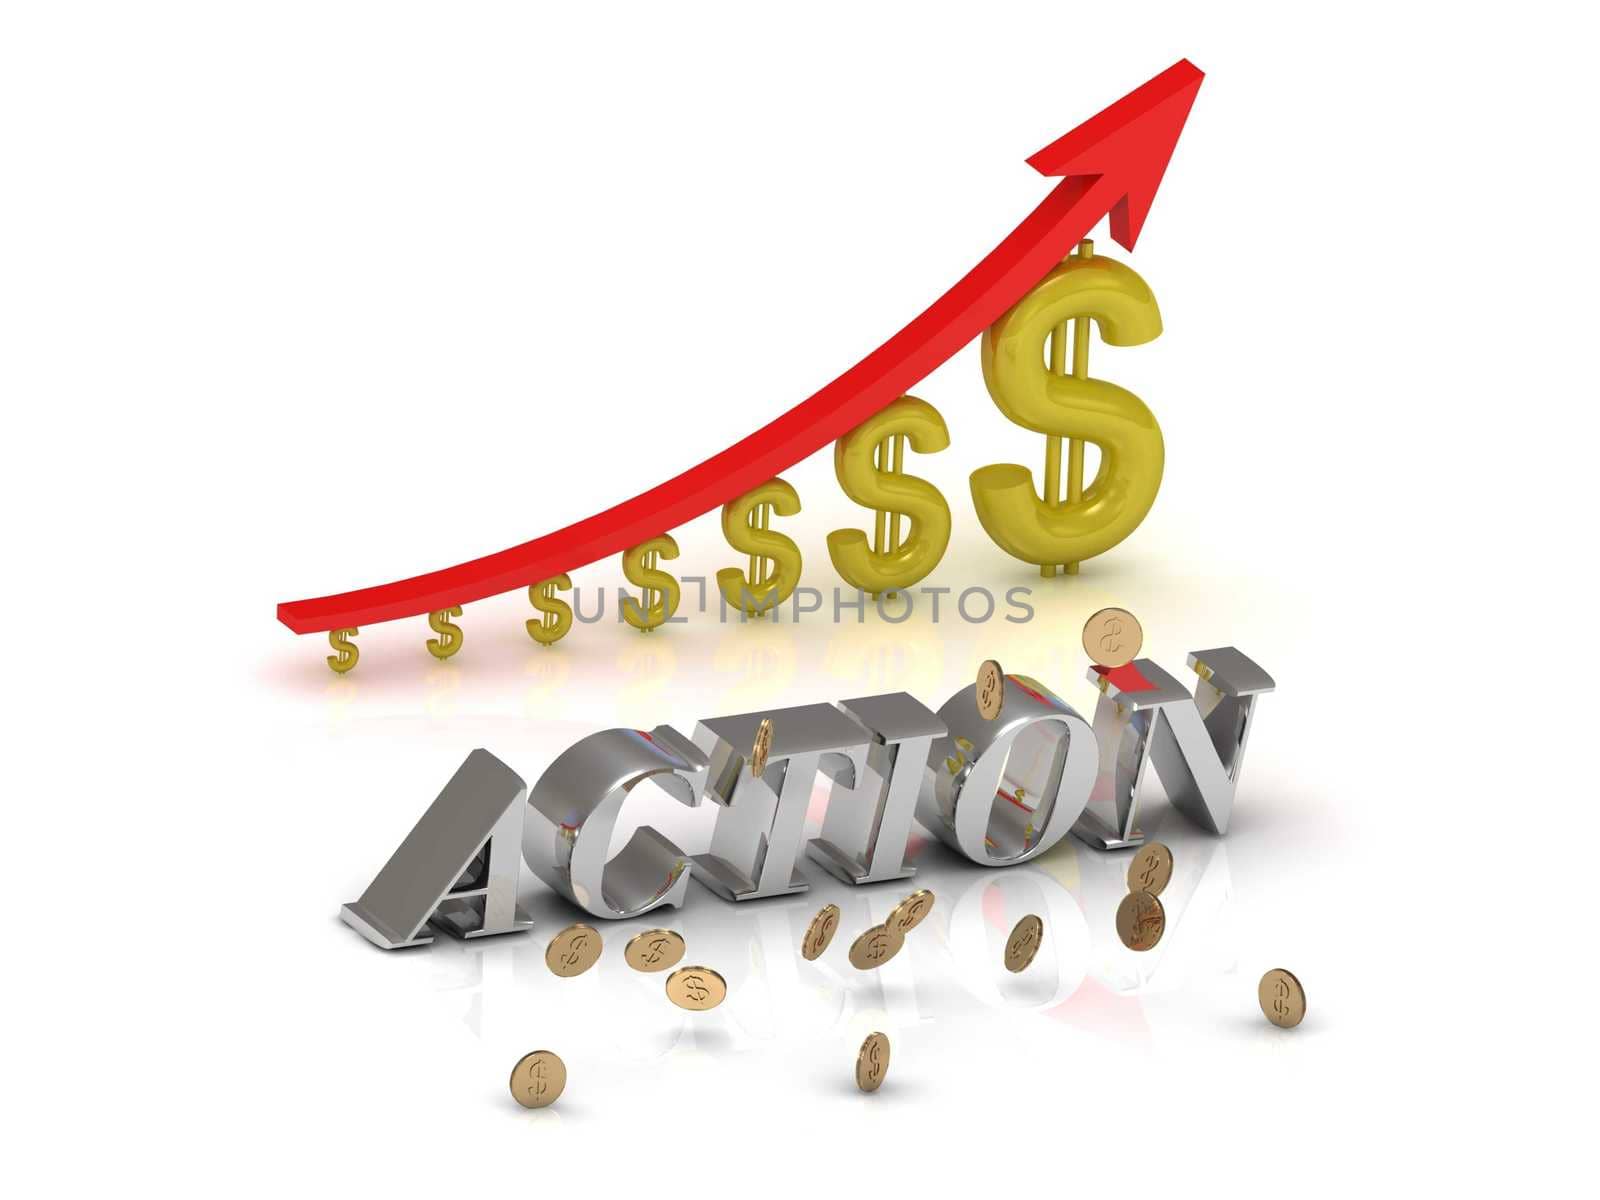 ACTION bright silver letters and graphic growing dollars and by GreenMost